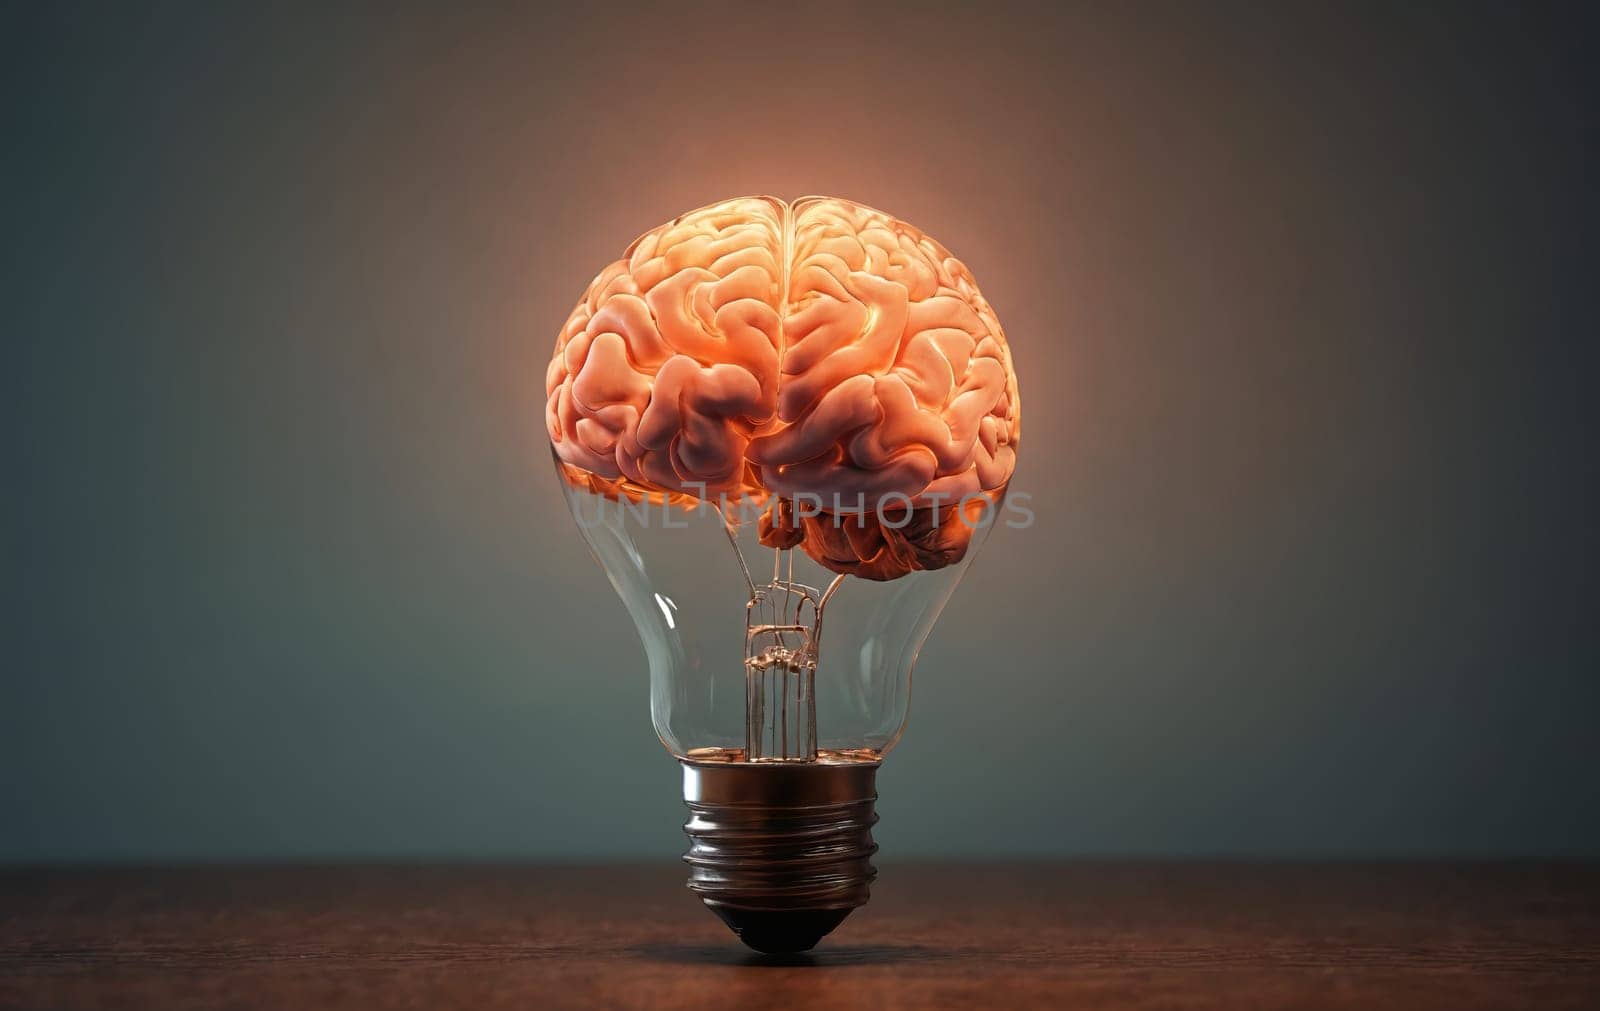 Human brain in a light bulb on a dark background. Brainstorming concept.